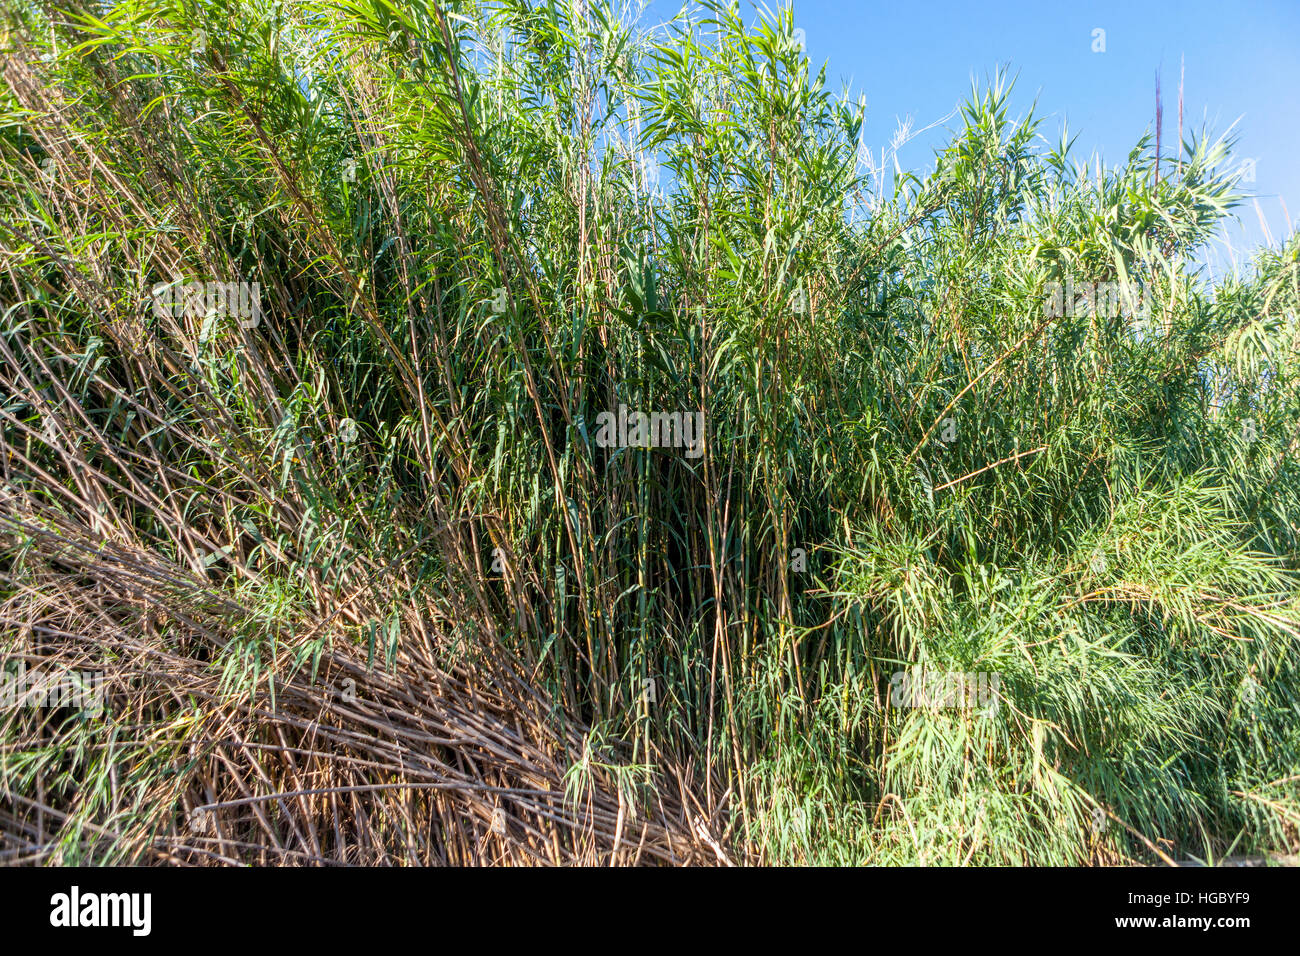 Arundo donax, Giant reed cane, is a tall perennial cane growing in the Mediterranean Stock Photo